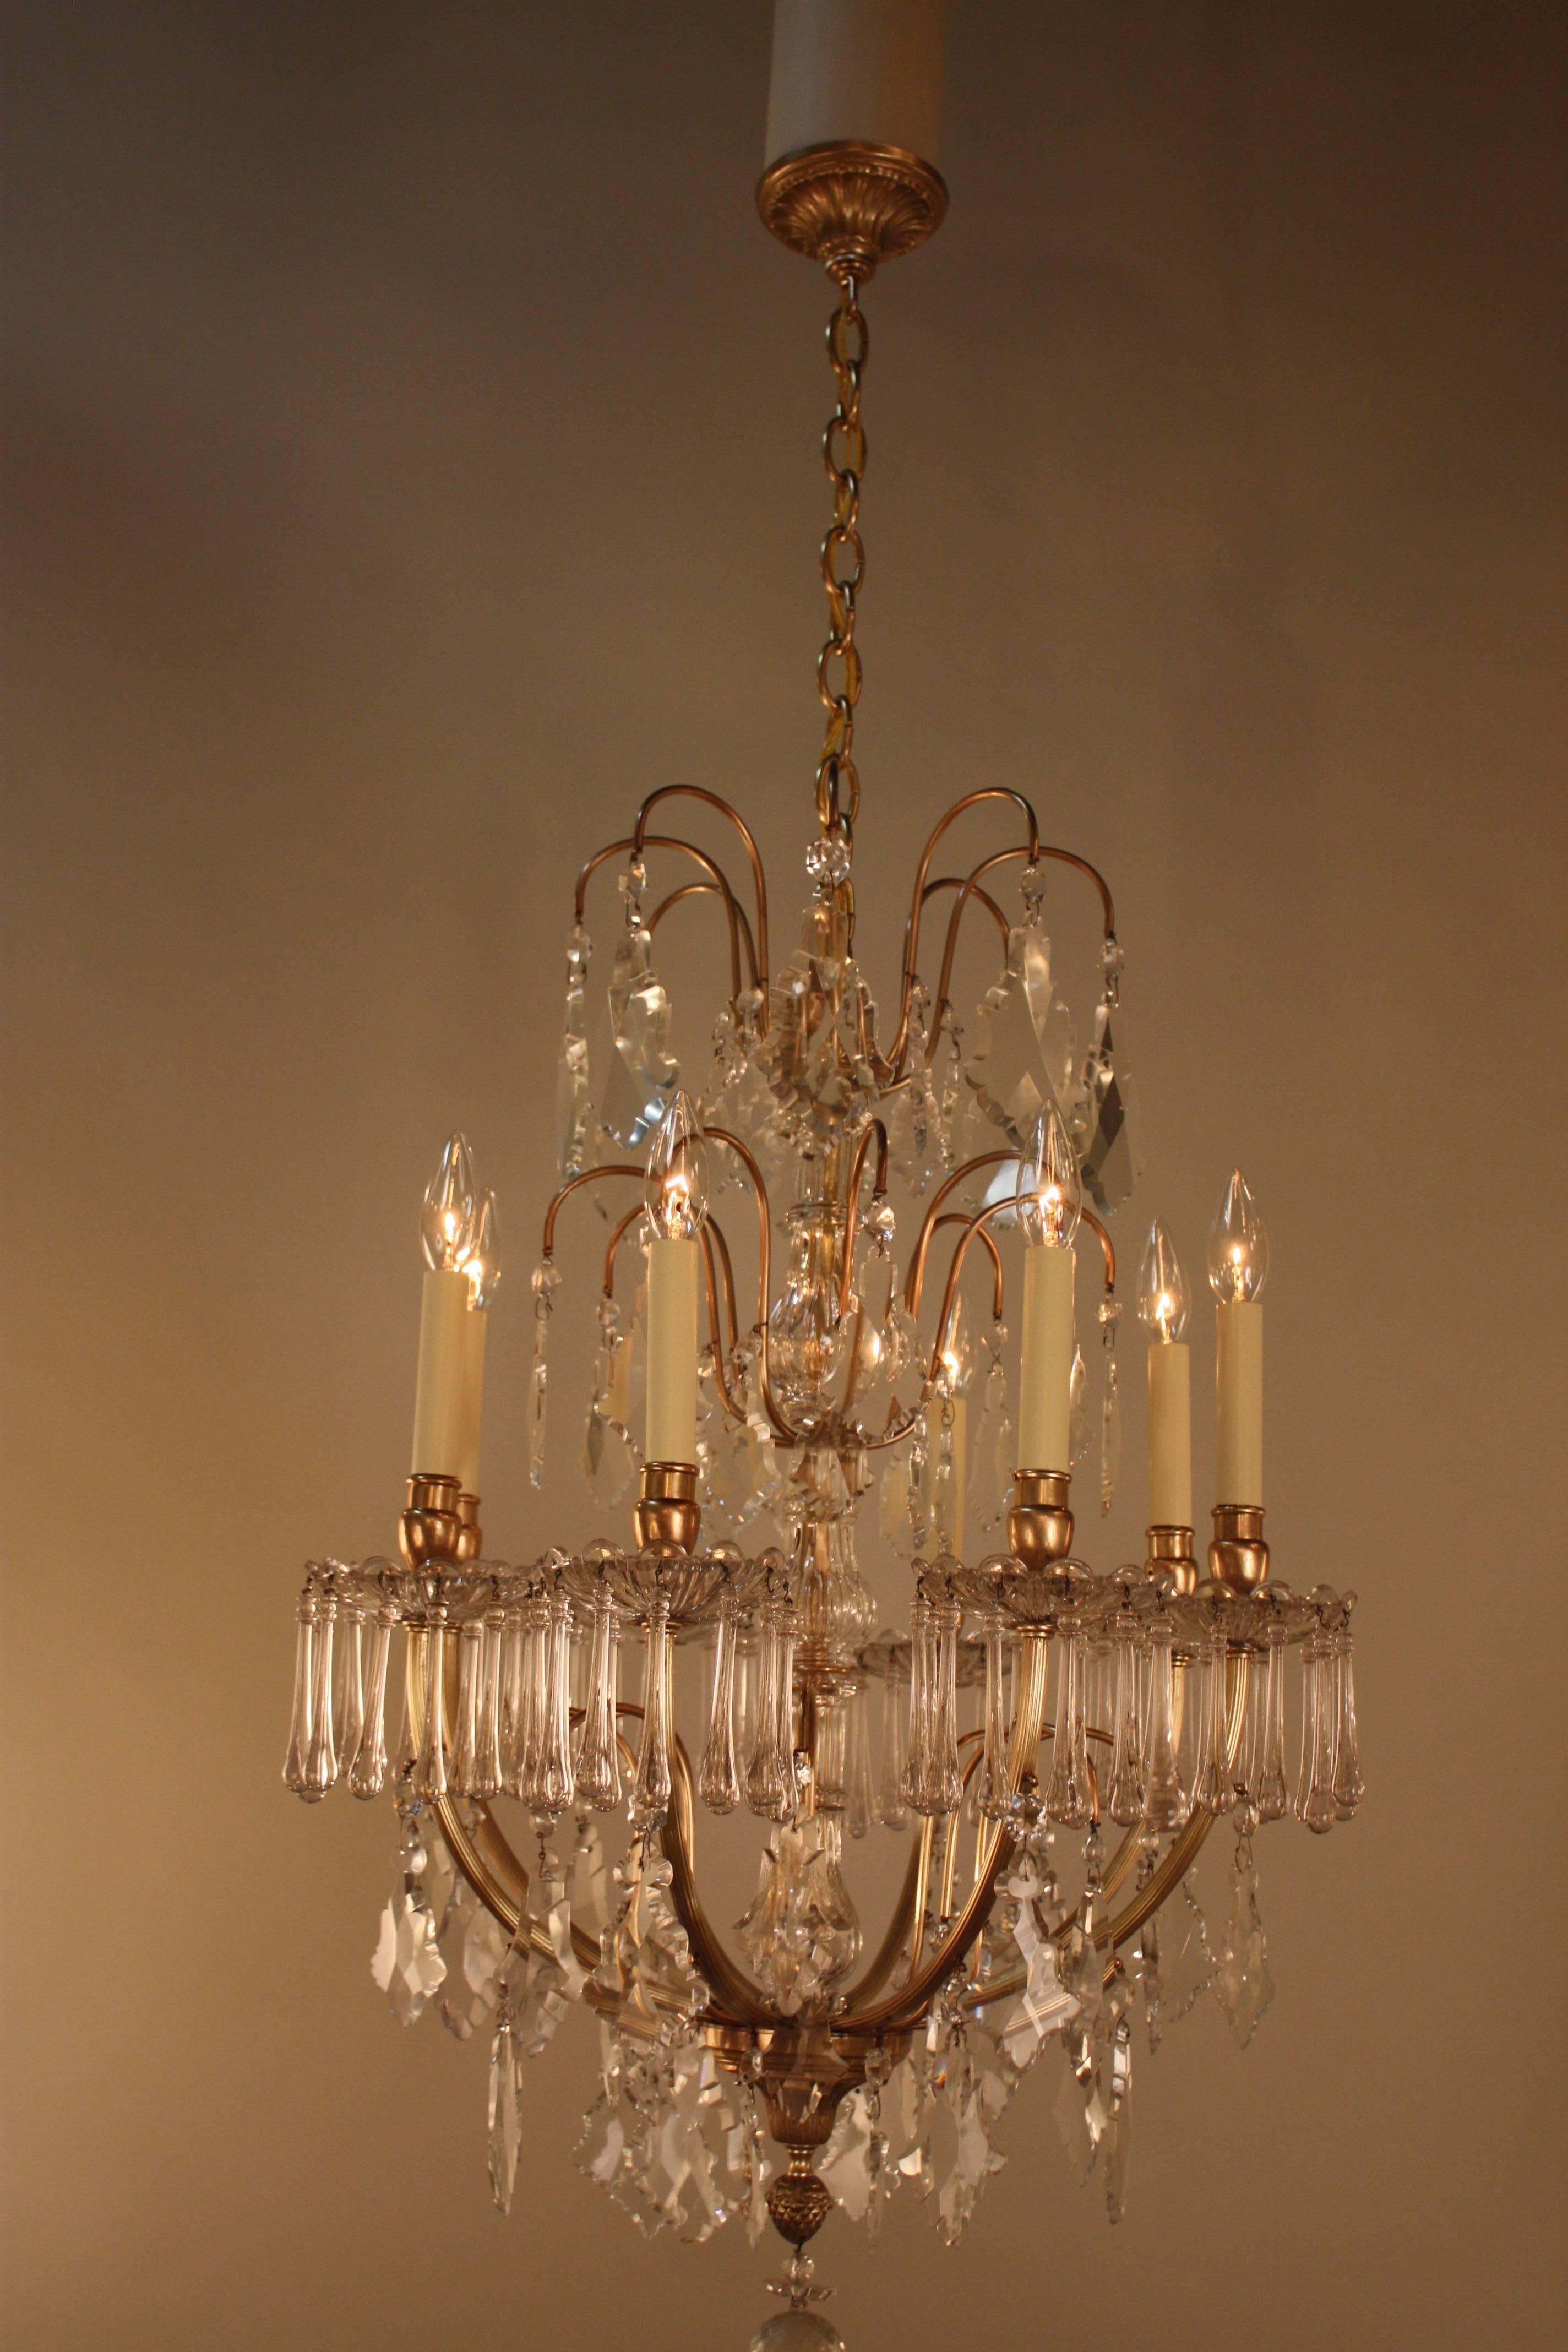 Spanish 1930s eight-light bronze and crystal chandelier.